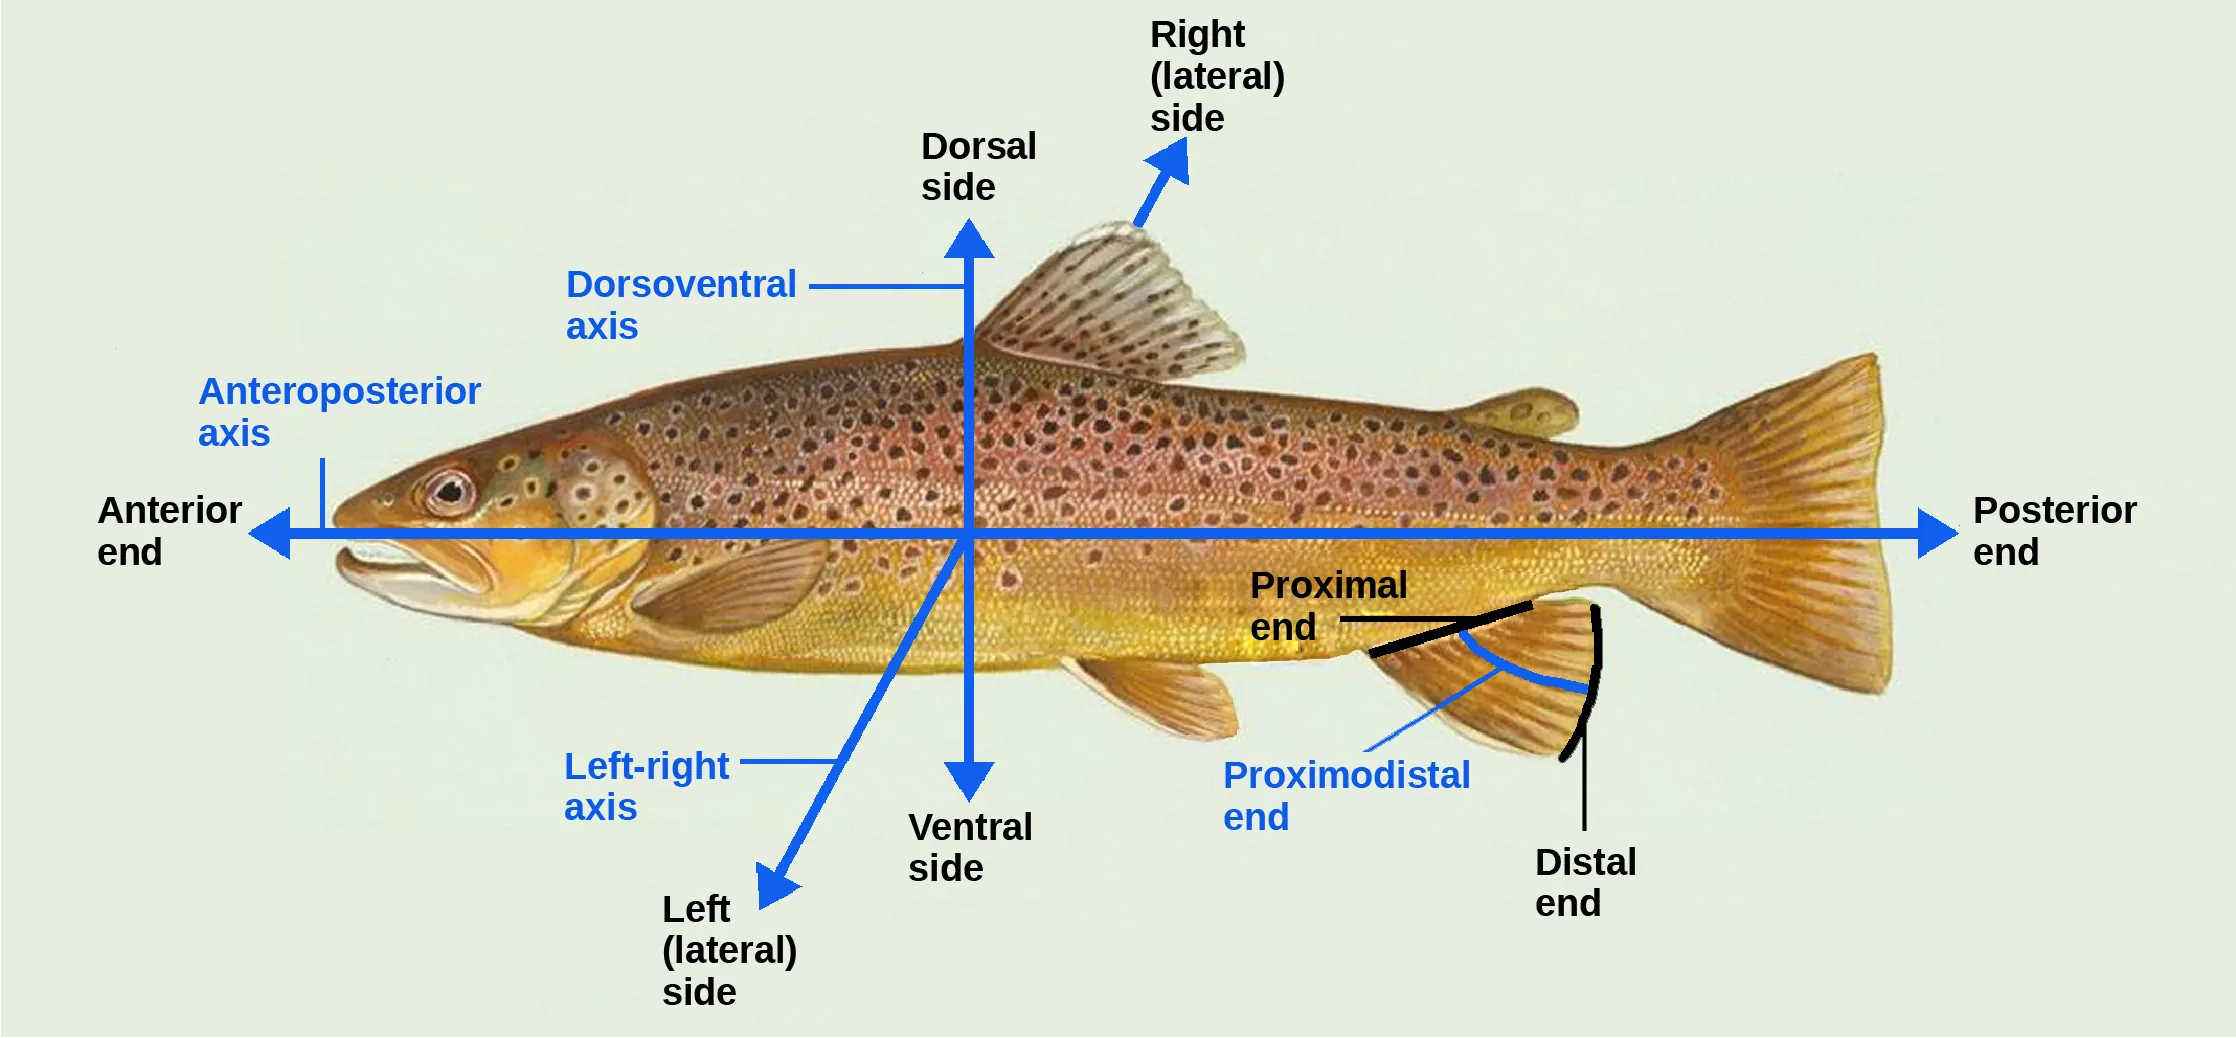 Illustration shows a fish dissected by lines into anterior (front) and posterior (rear) ends and dorsal (top) and ventral (bottom) surfaces.  It also indicates that where the fishs fin contacts its body is the proximodistal end, and the outer edge of the fin is the distal end.